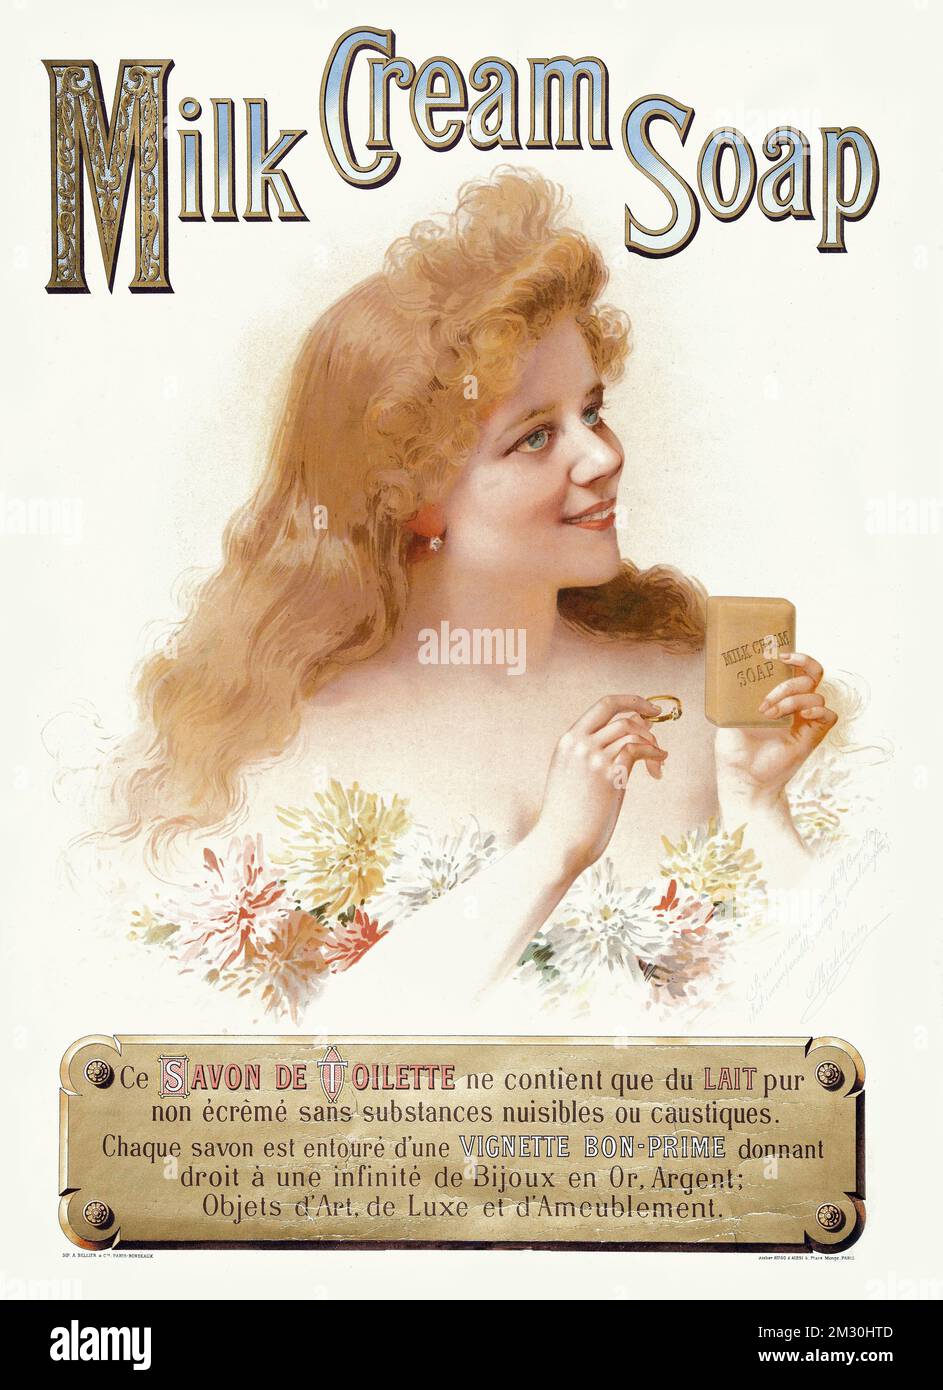 Vintage advertising poster - Milk cream soap. This toilet soap contains only pure non-skimmed milk without harmful or caustic substances - Ateliers Hu Stock Photo